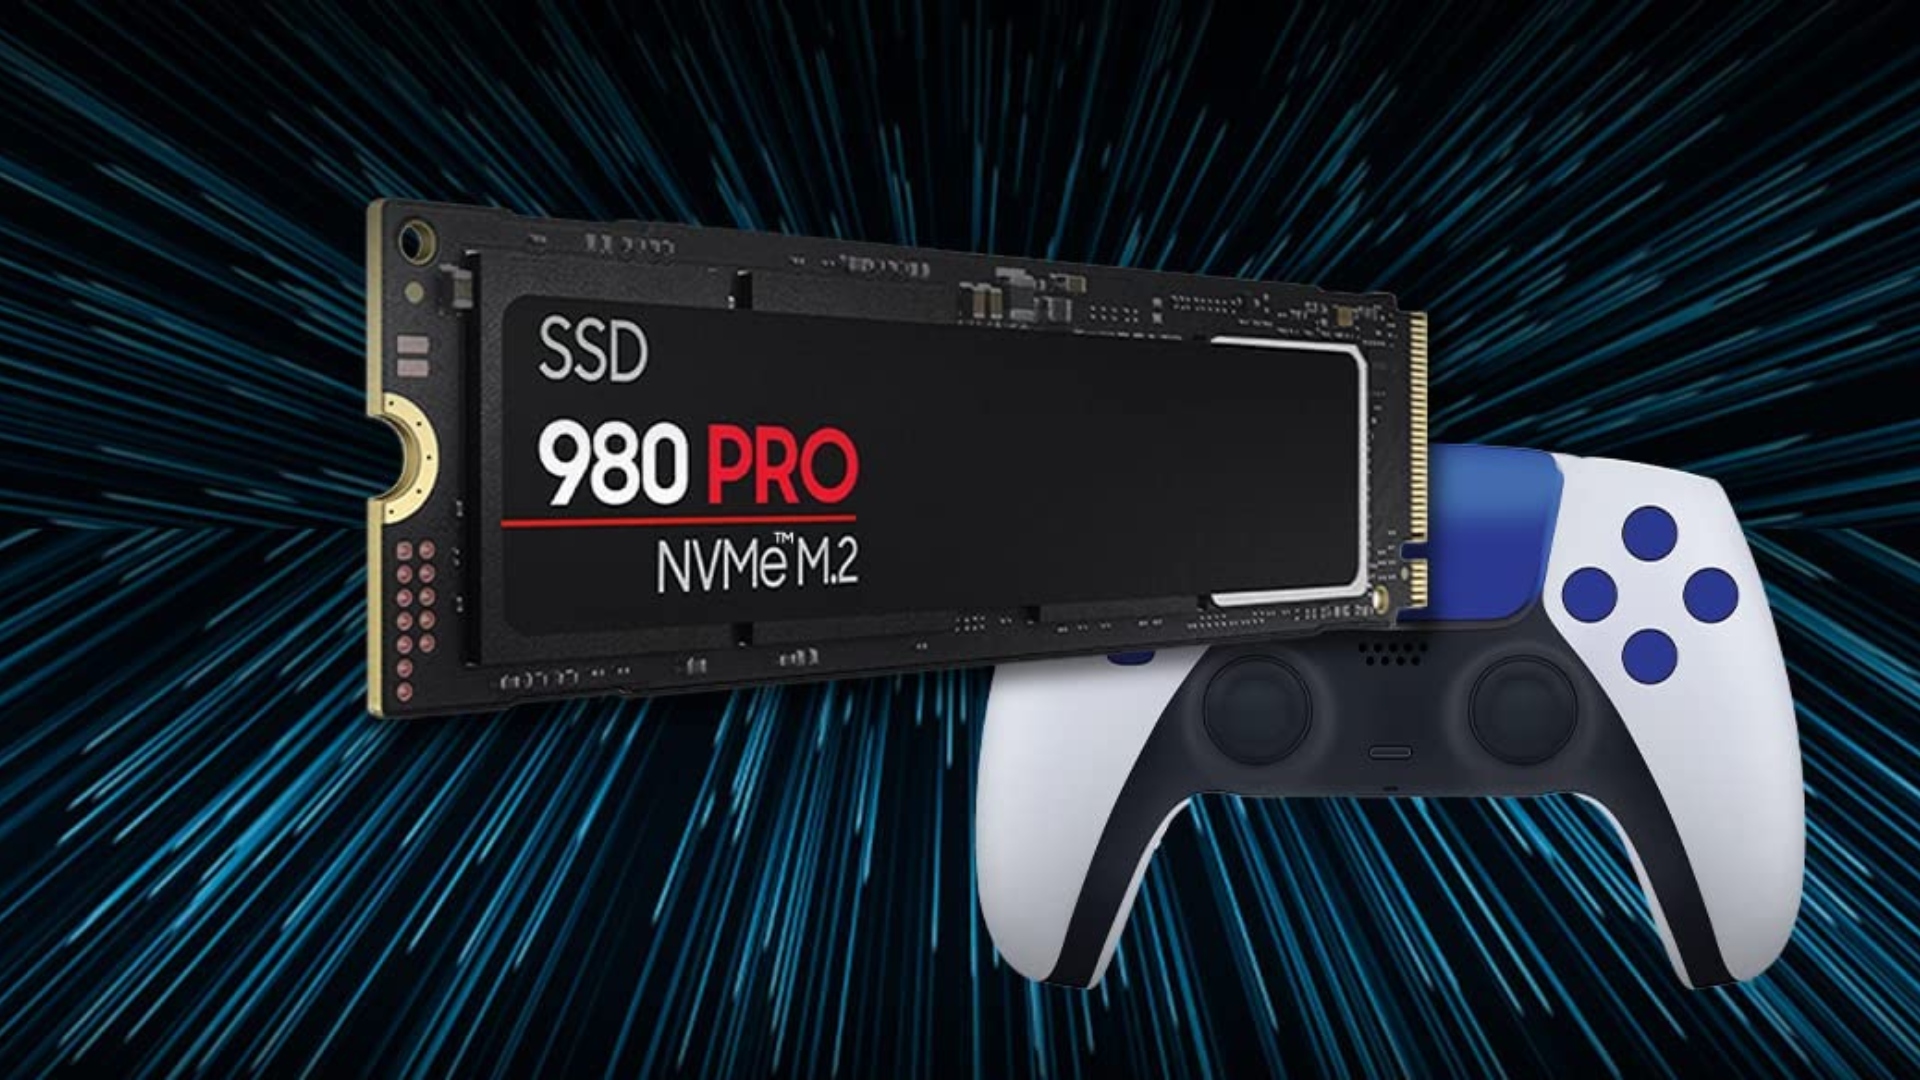 Get a Samsung 980 Pro NVMe SSD $200 cheaper for Black Friday